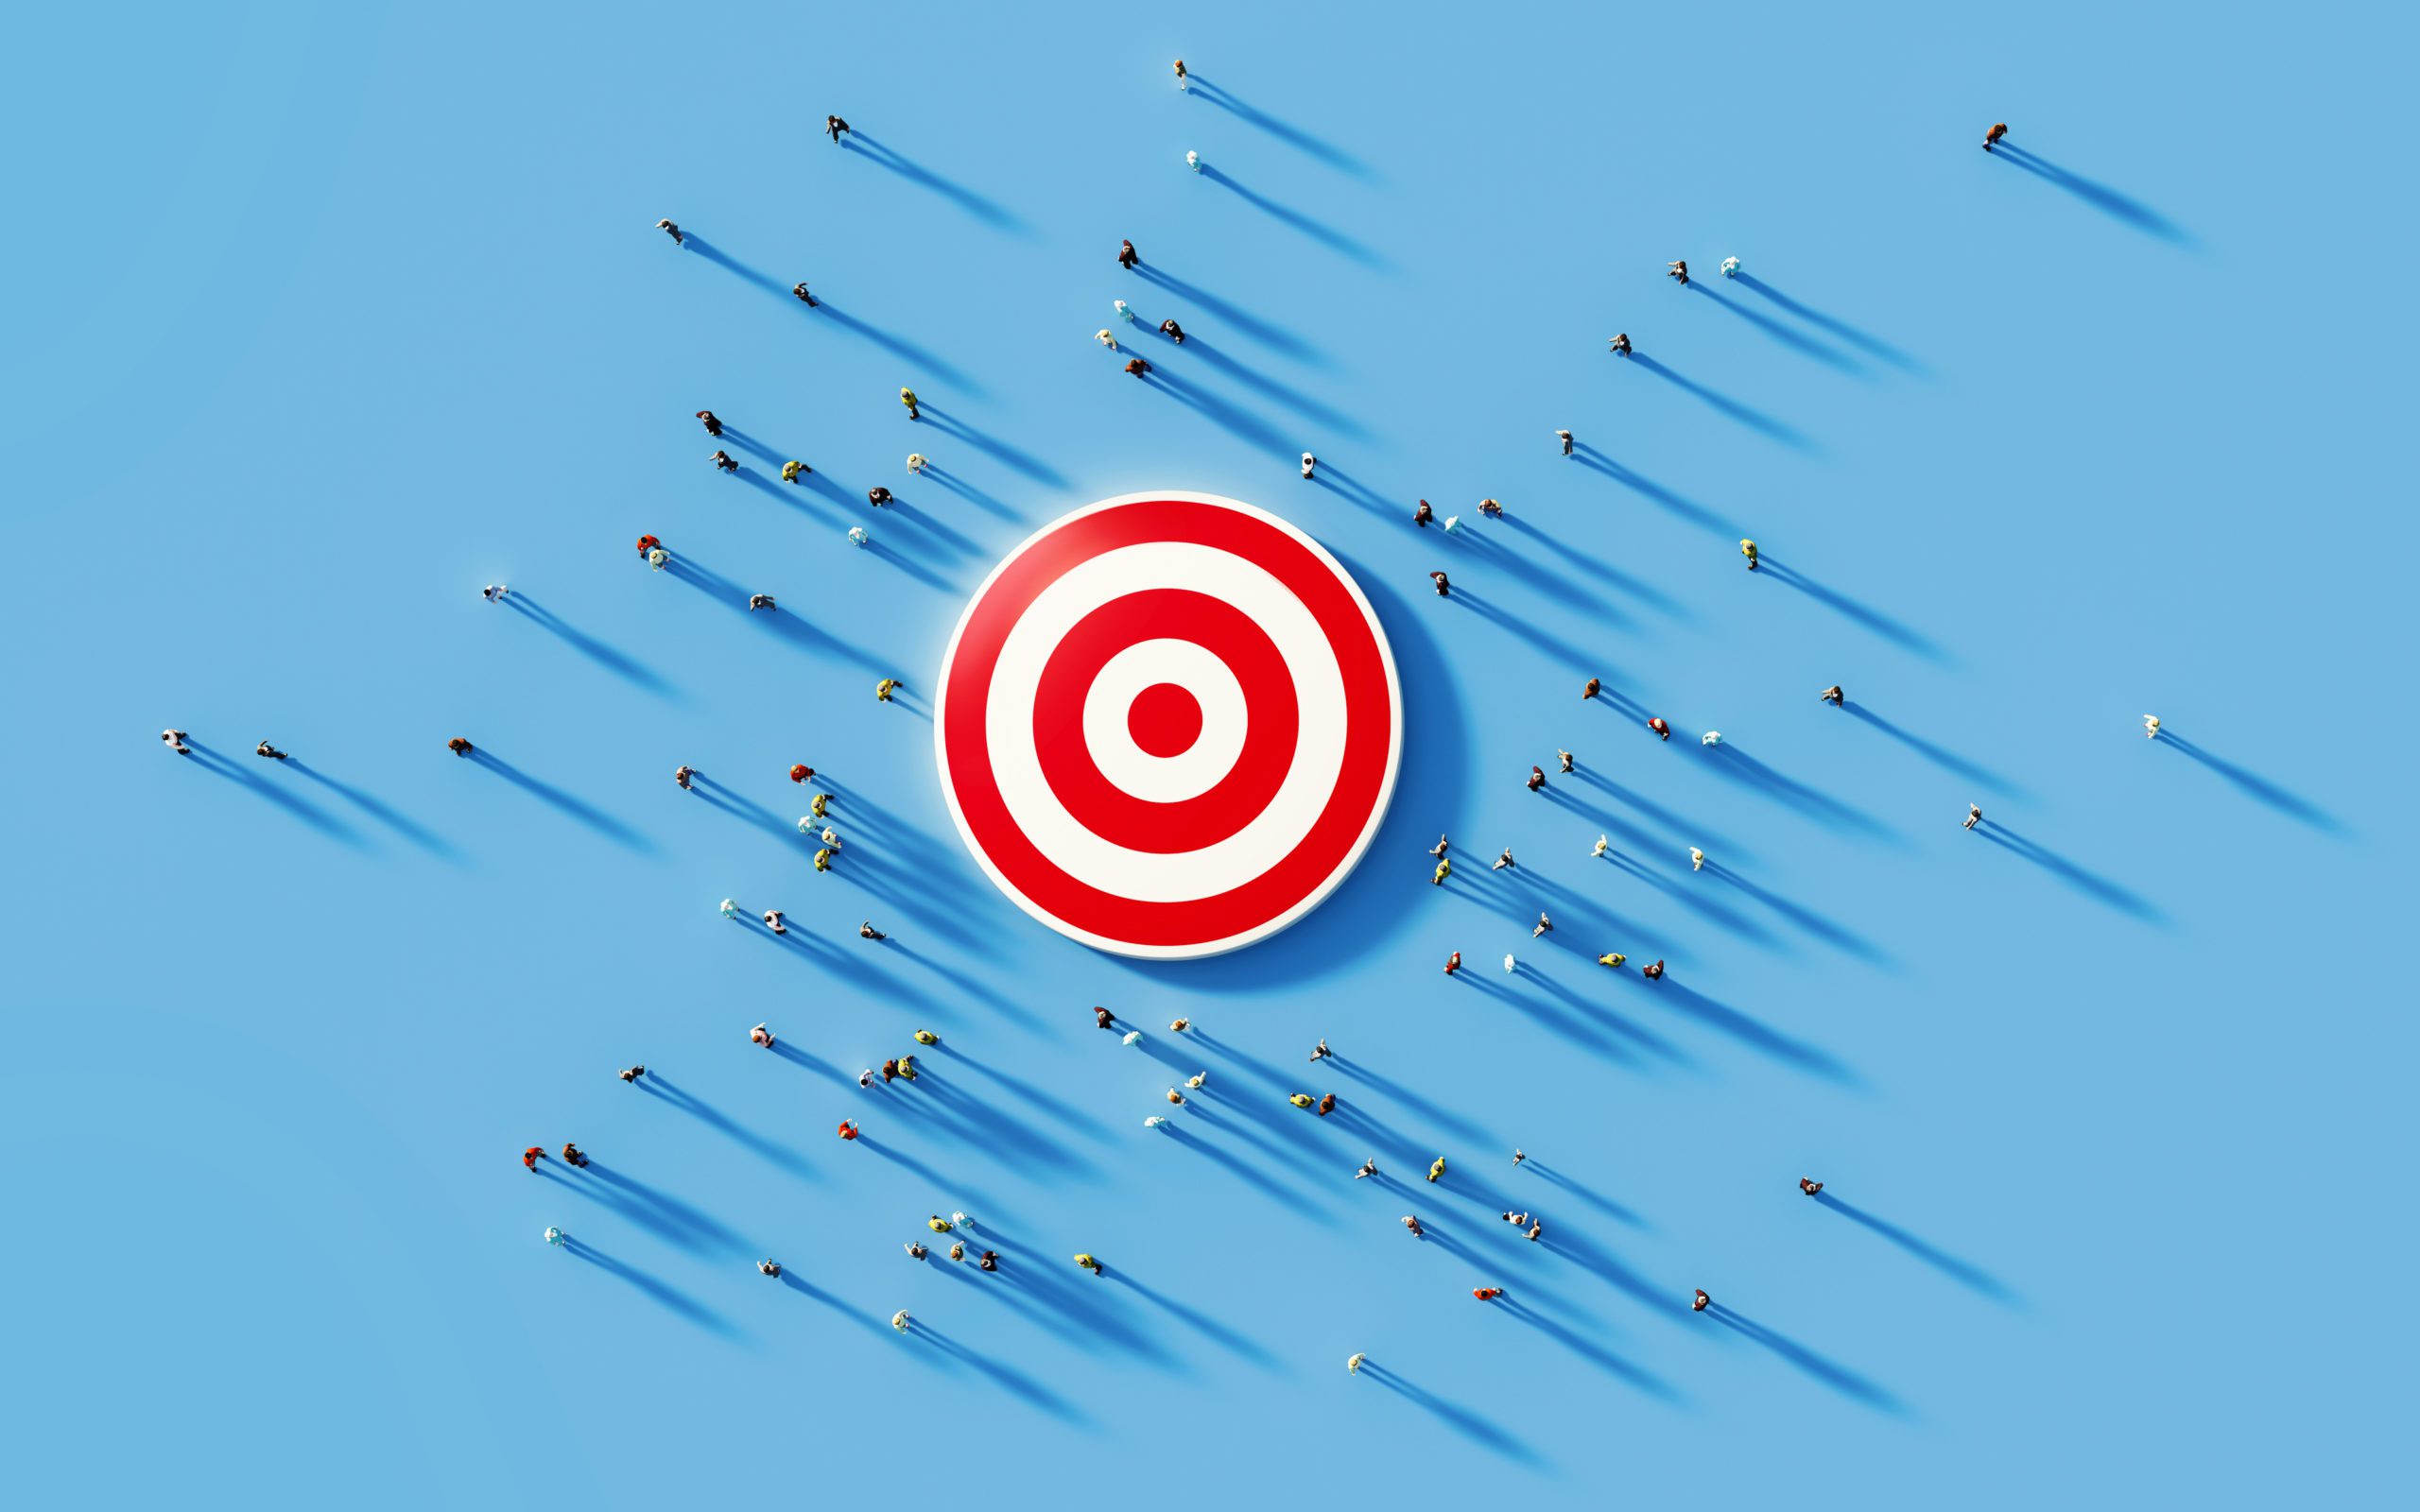 Human crowd gathering around a red bulls eye on blue background. Horizontal composition with copy space. Clipping path is included. Marketing and target audience concept